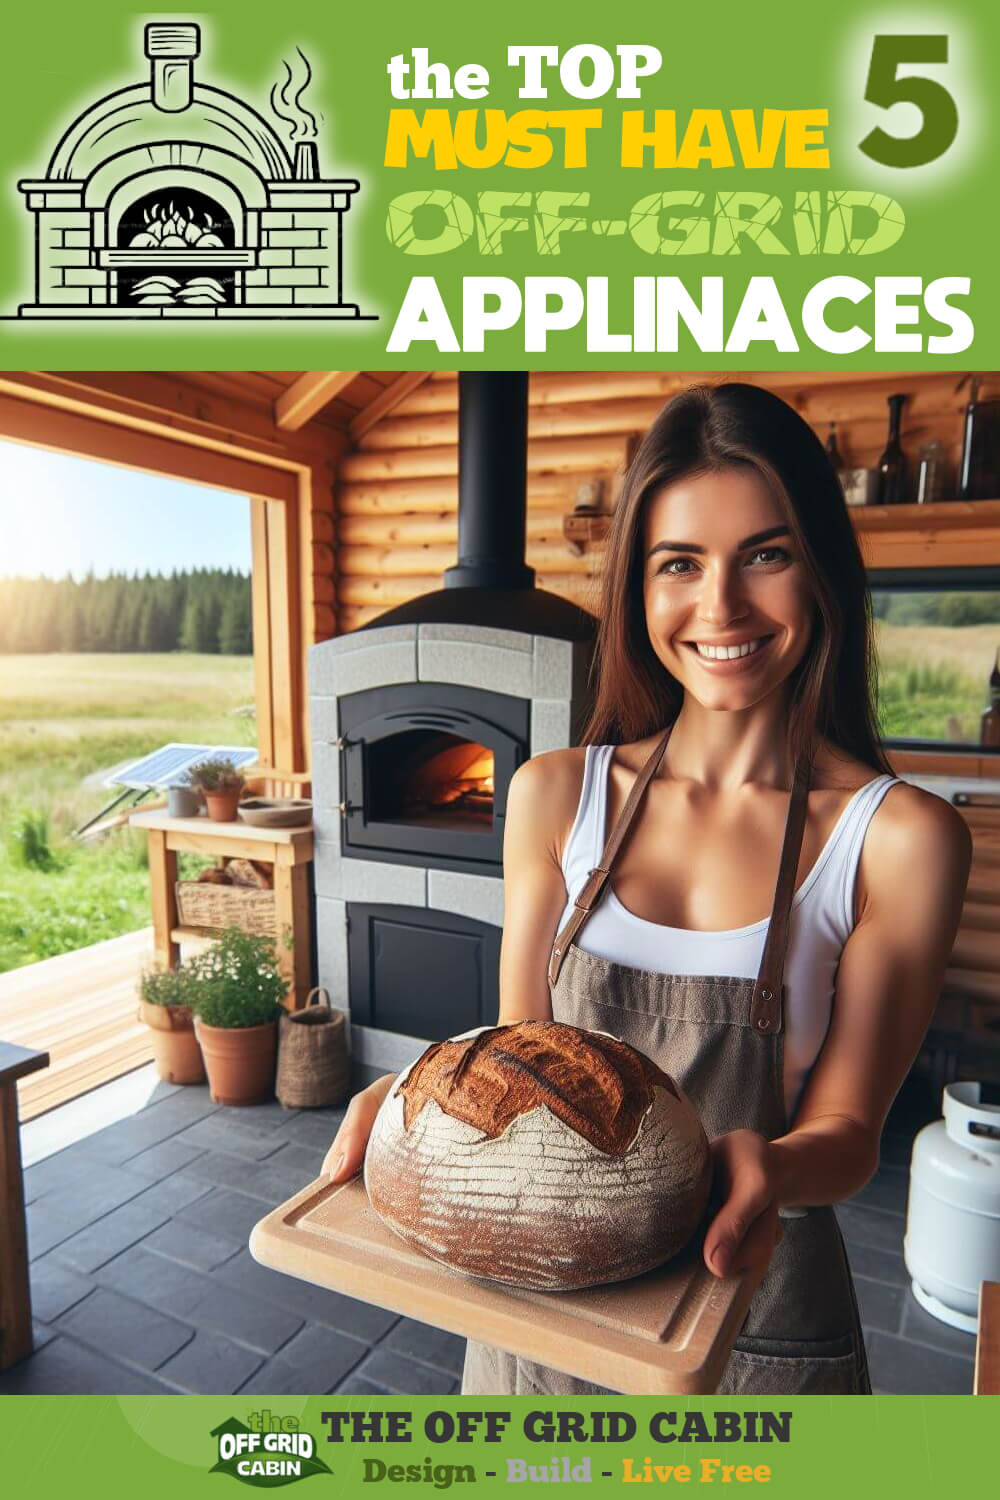 Image of smiling woman holding a freshly baked bread from an off grid oven with the title the top 5 must have off grid appliances